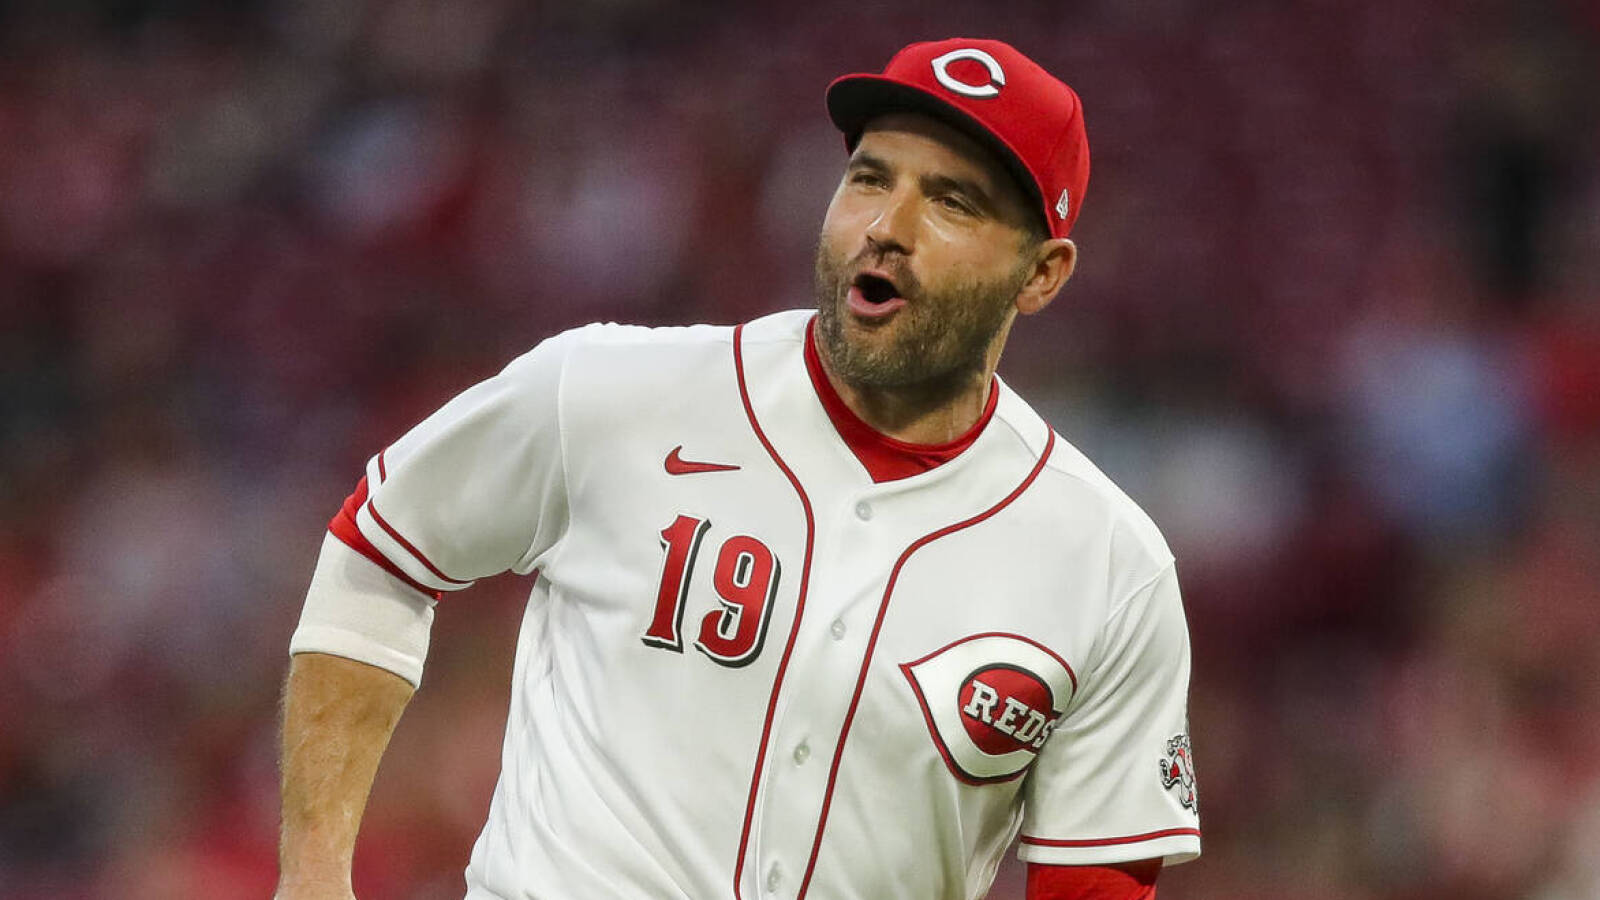 Joey Votto Net Worth and Biography